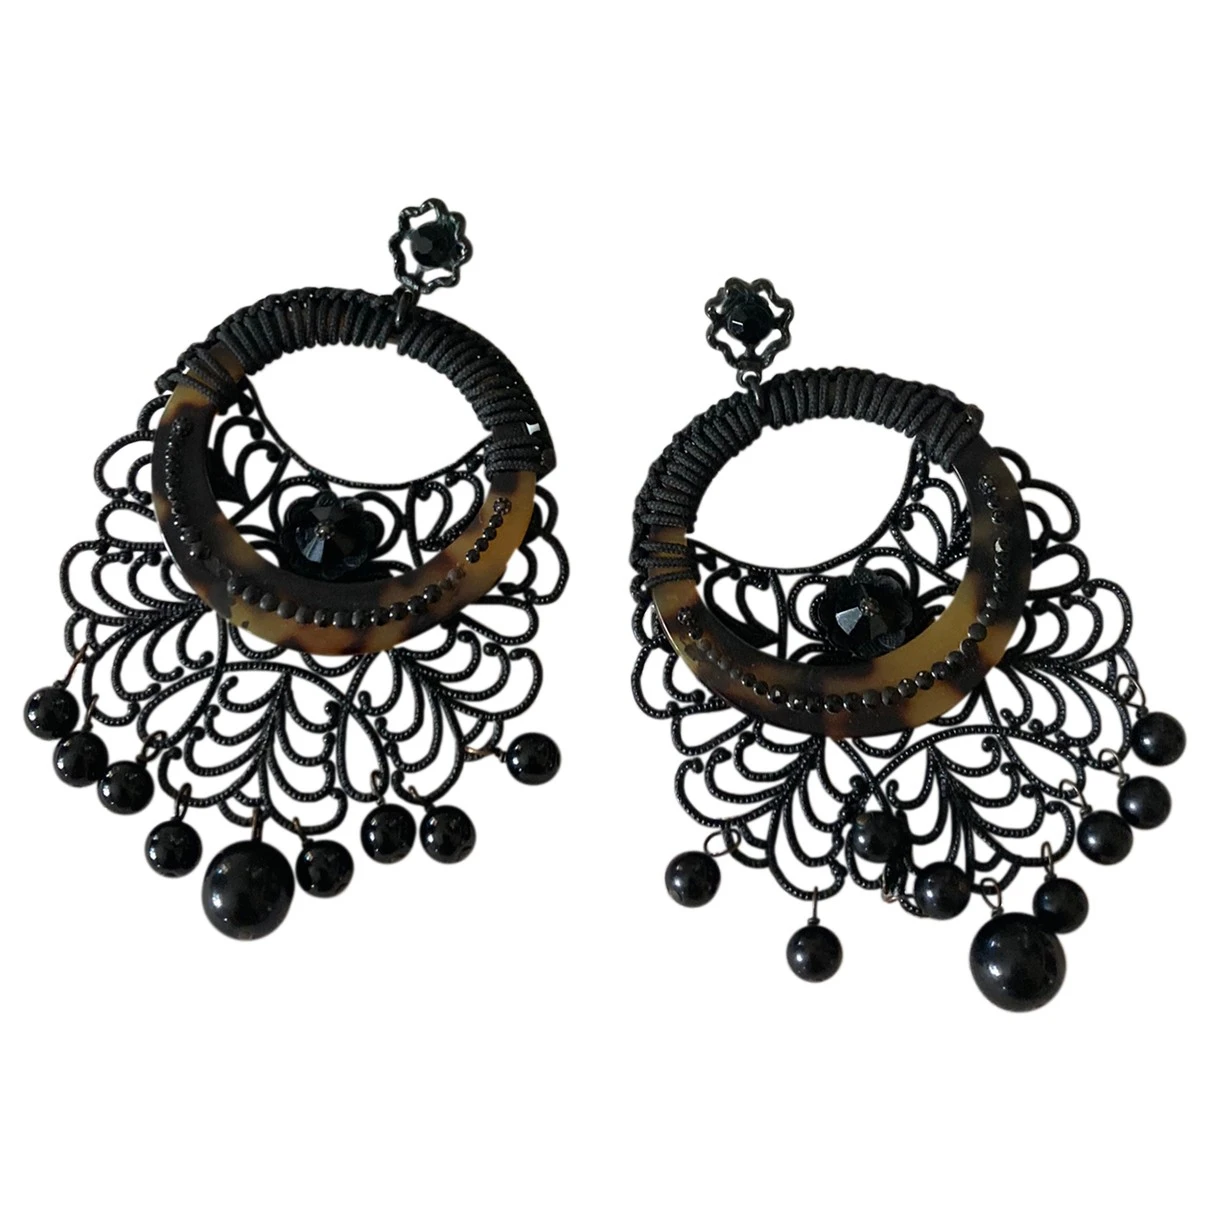 jewellery Gas earrings for Female Metal. Used condition